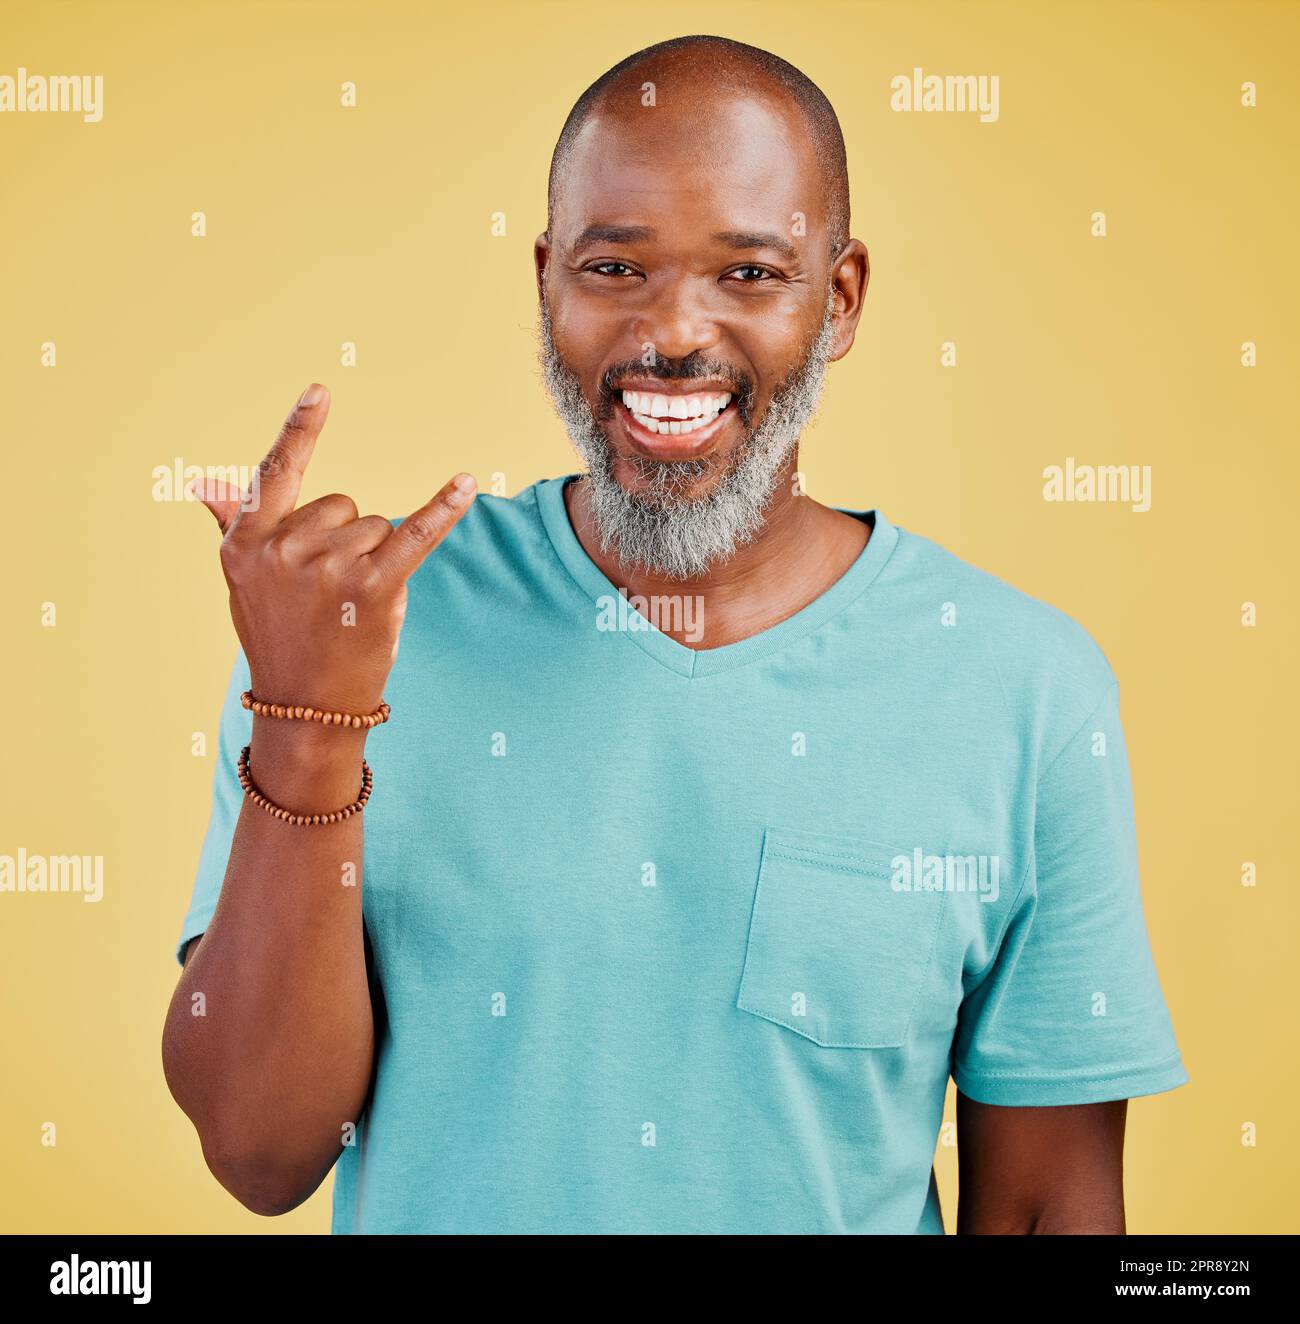 Happy mature african man expressing a rock and roll symbol gesture with his hands against a yellow studio background. Carefree, cool and confident black man making horn gesture to show good vibes Stock Photo